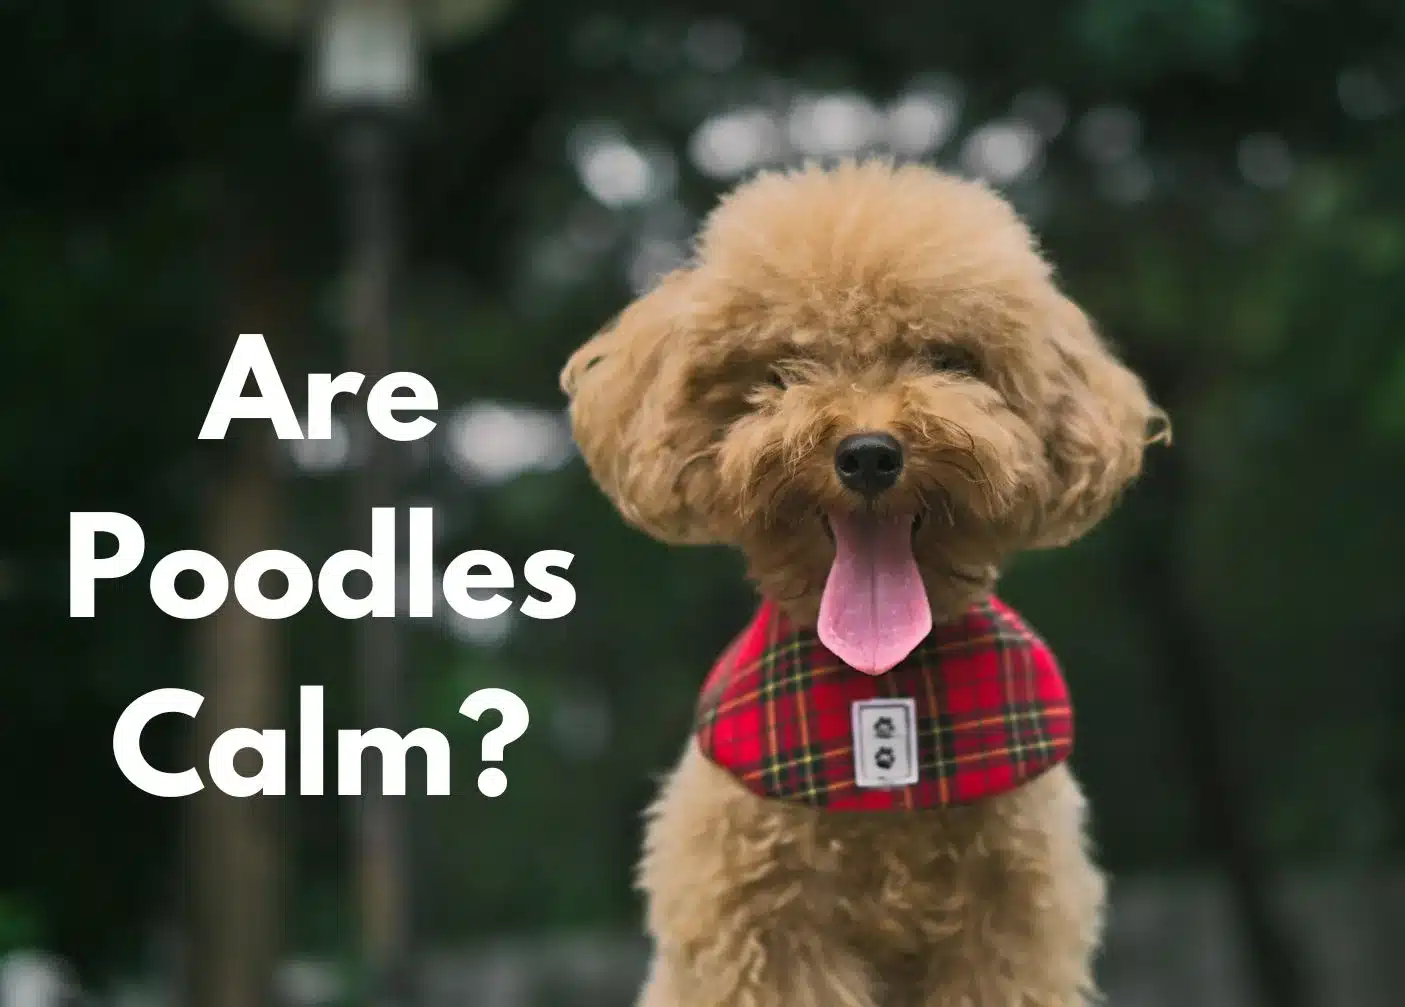 a brown poodle with its tongue out | at what age do poodles calm down?